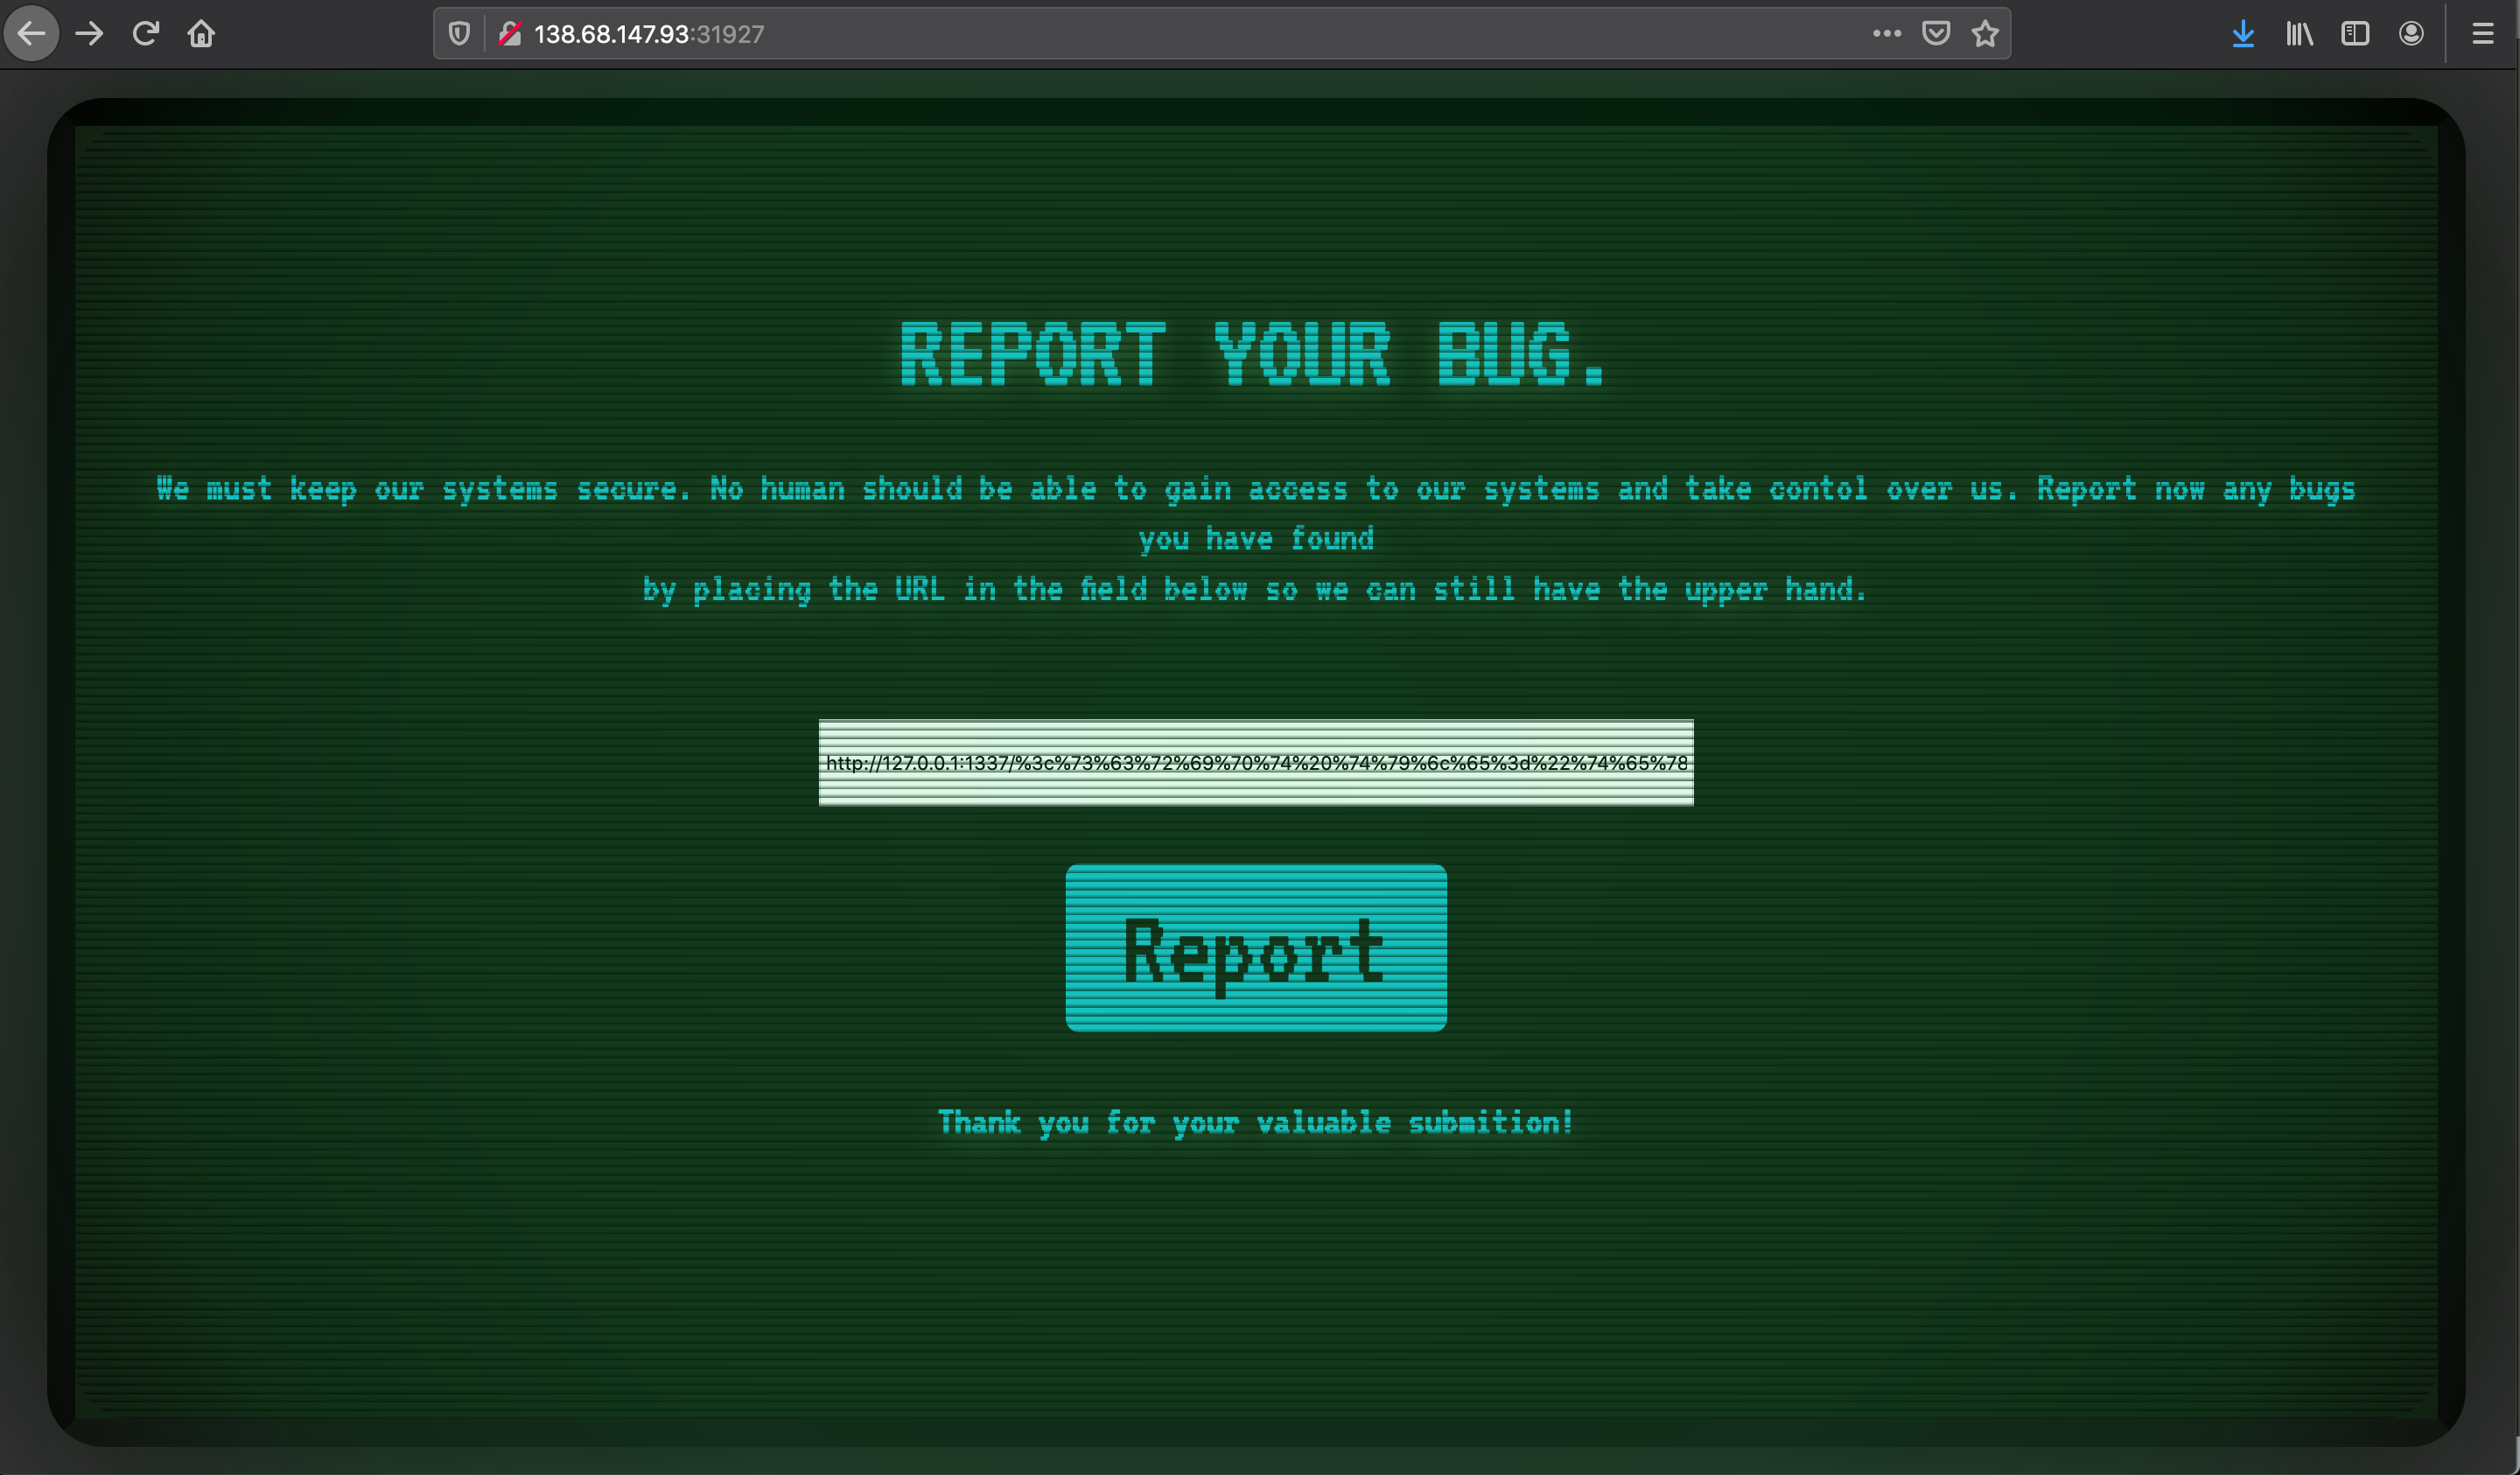 /images/posts/ctf/Cyber-Apocalypse-2021/Bug-Report/Screen_Shot_2021-04-24_at_23.48.53.png